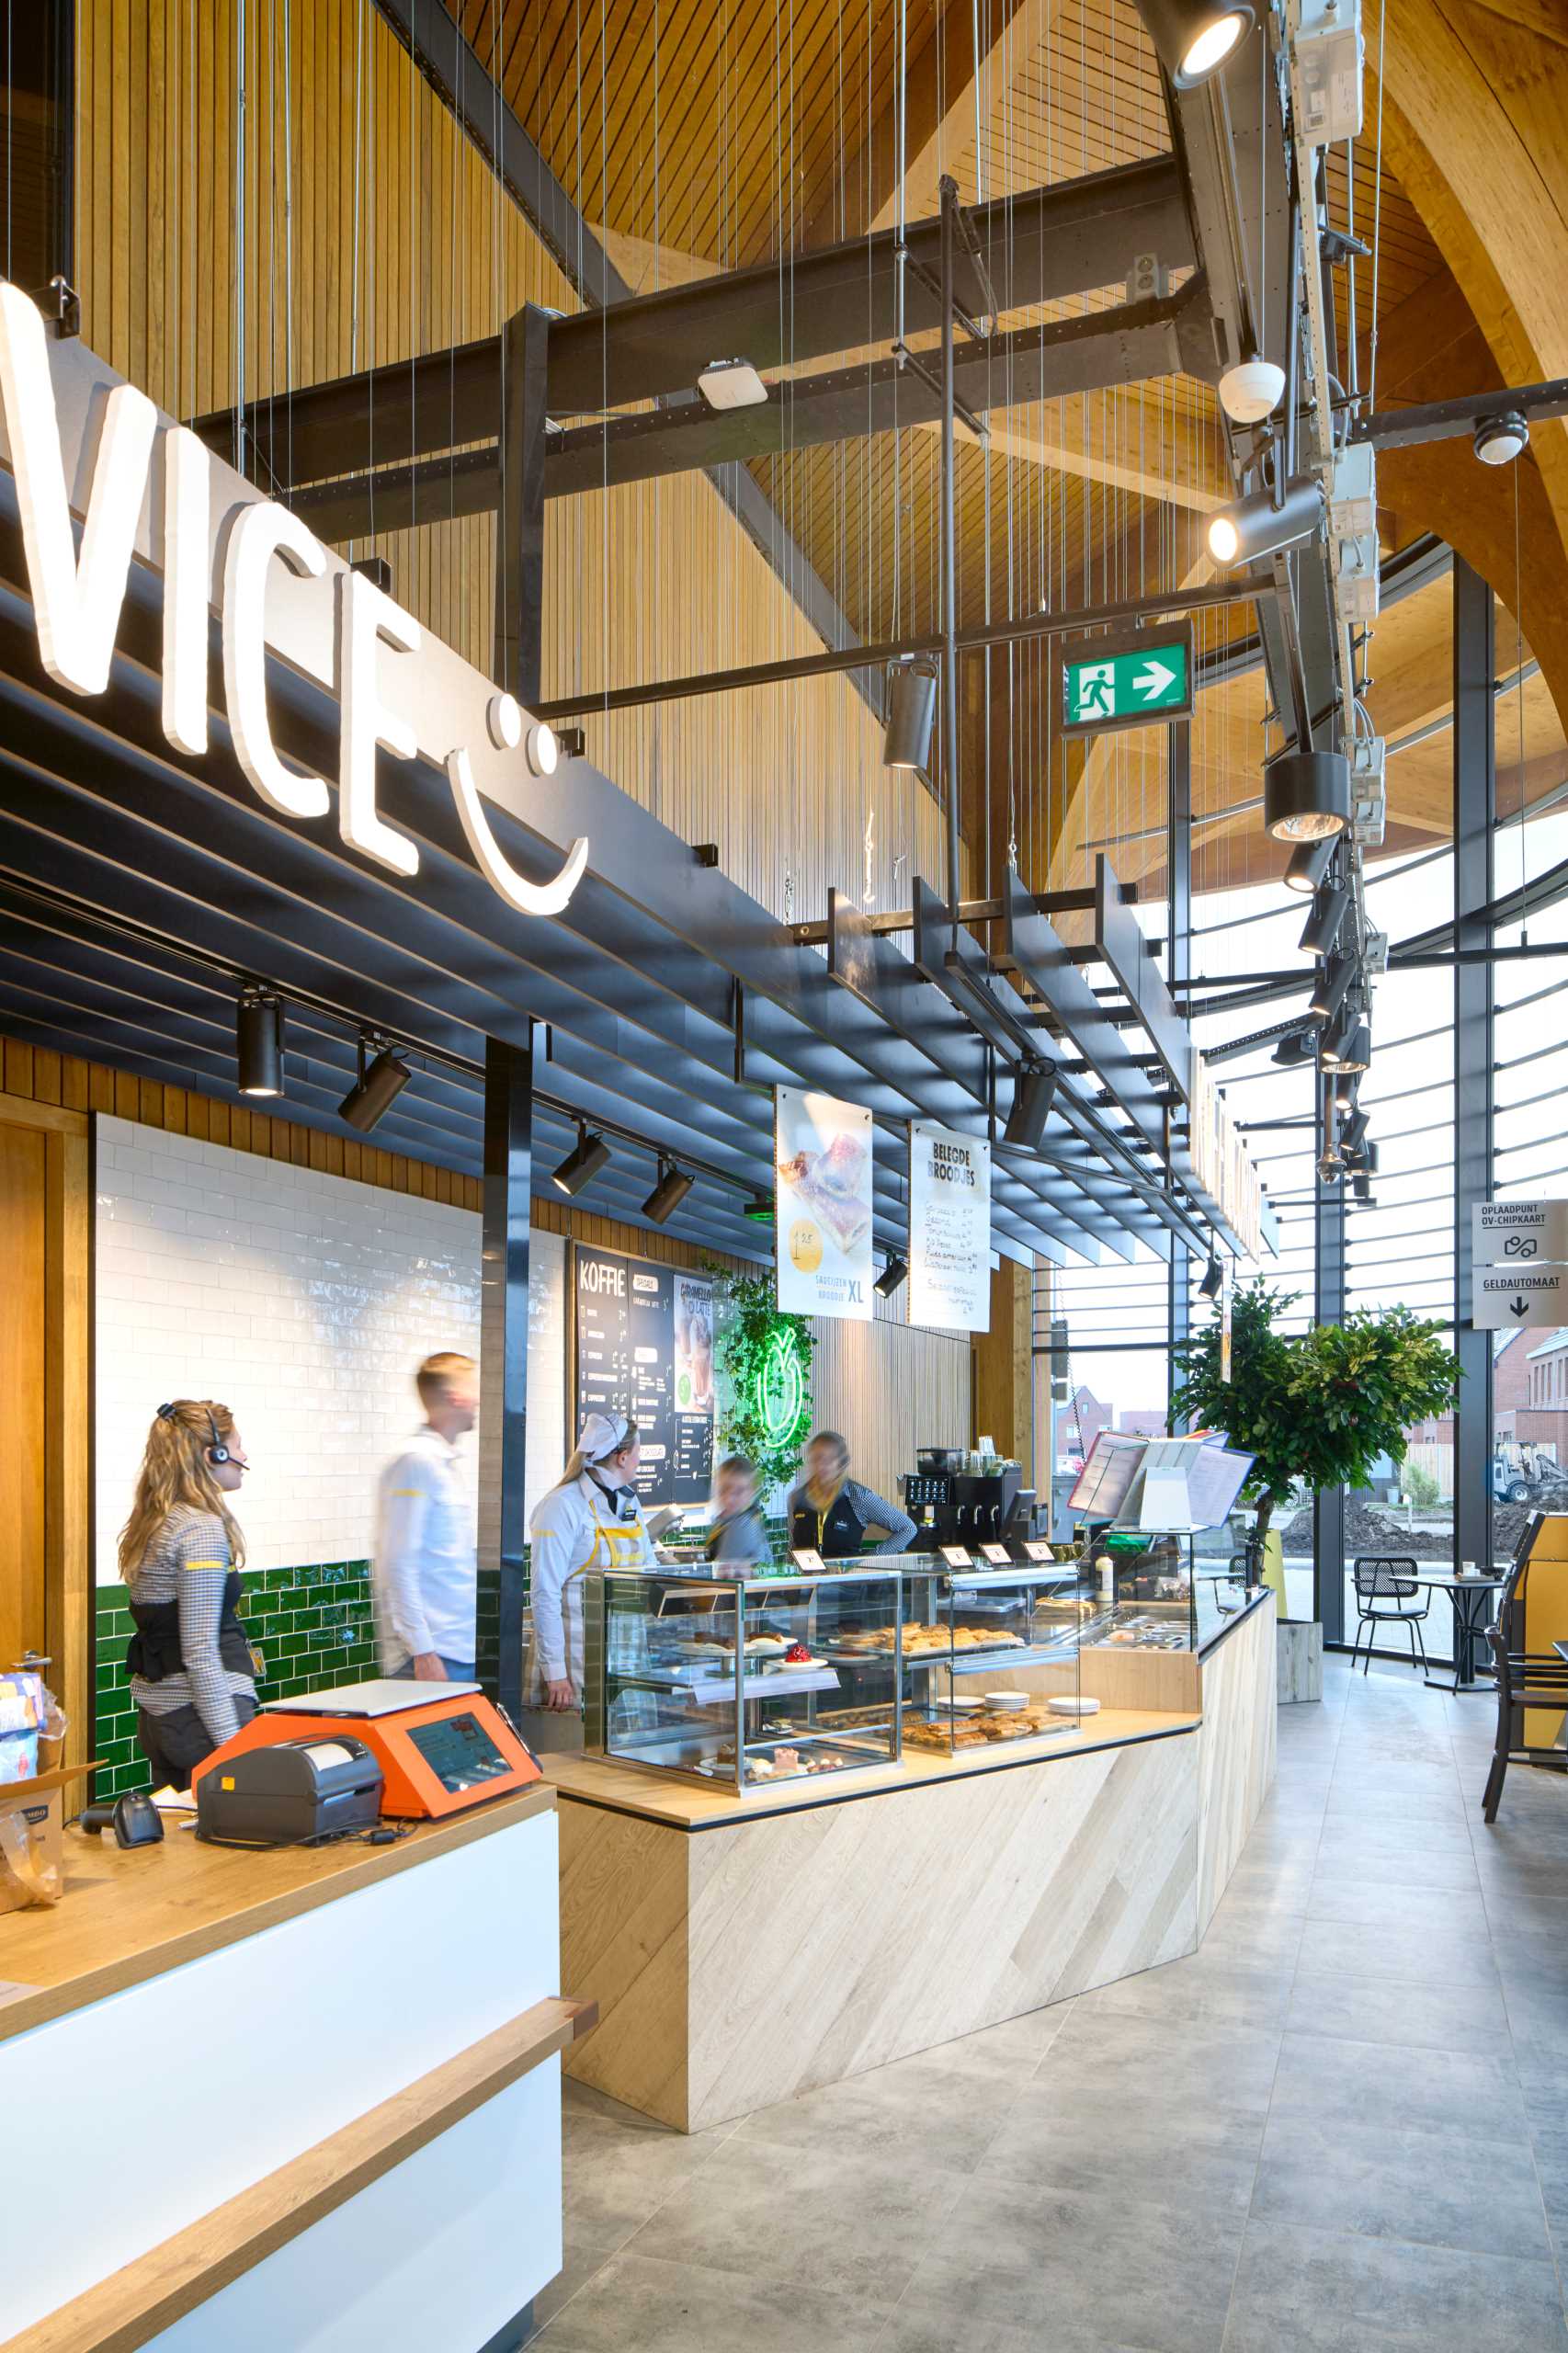 A modern supermarket and cafe with an exposed wood structure with a cathedral-like appearance.